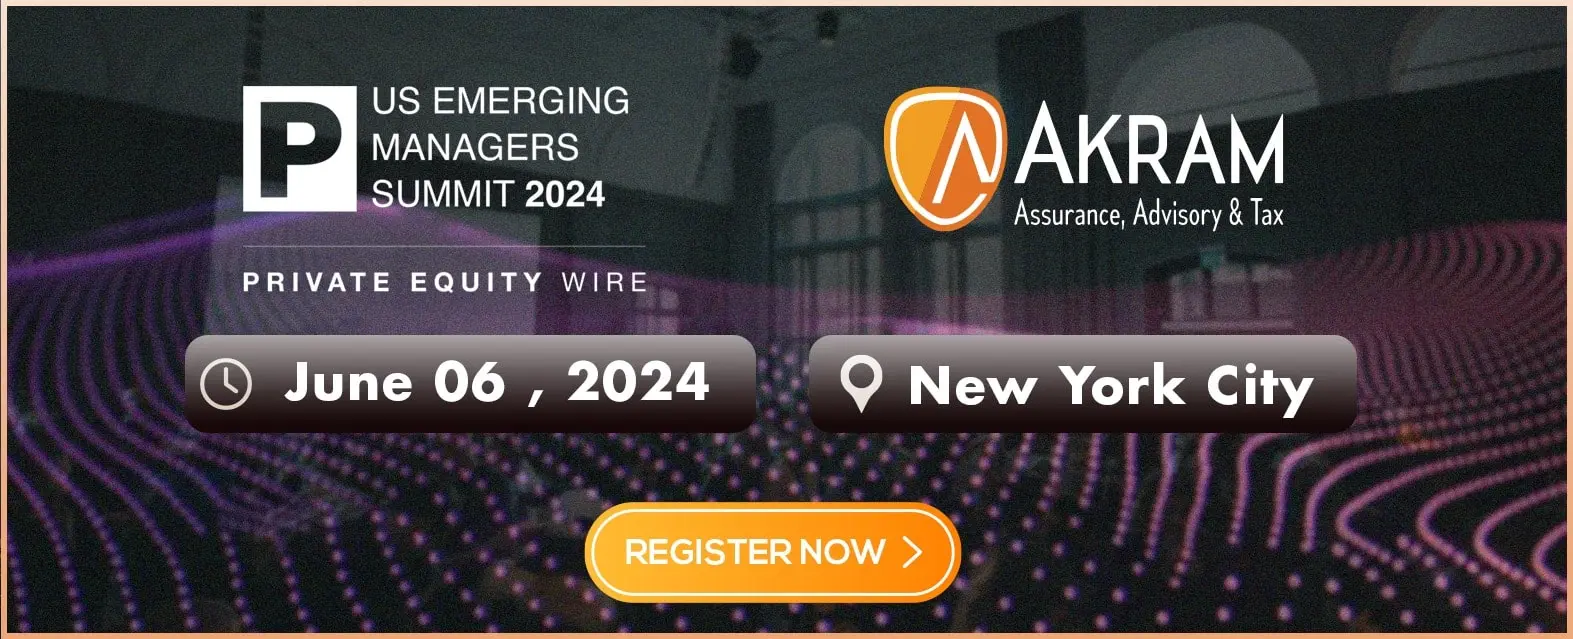 Alts Newyork Conference 2024